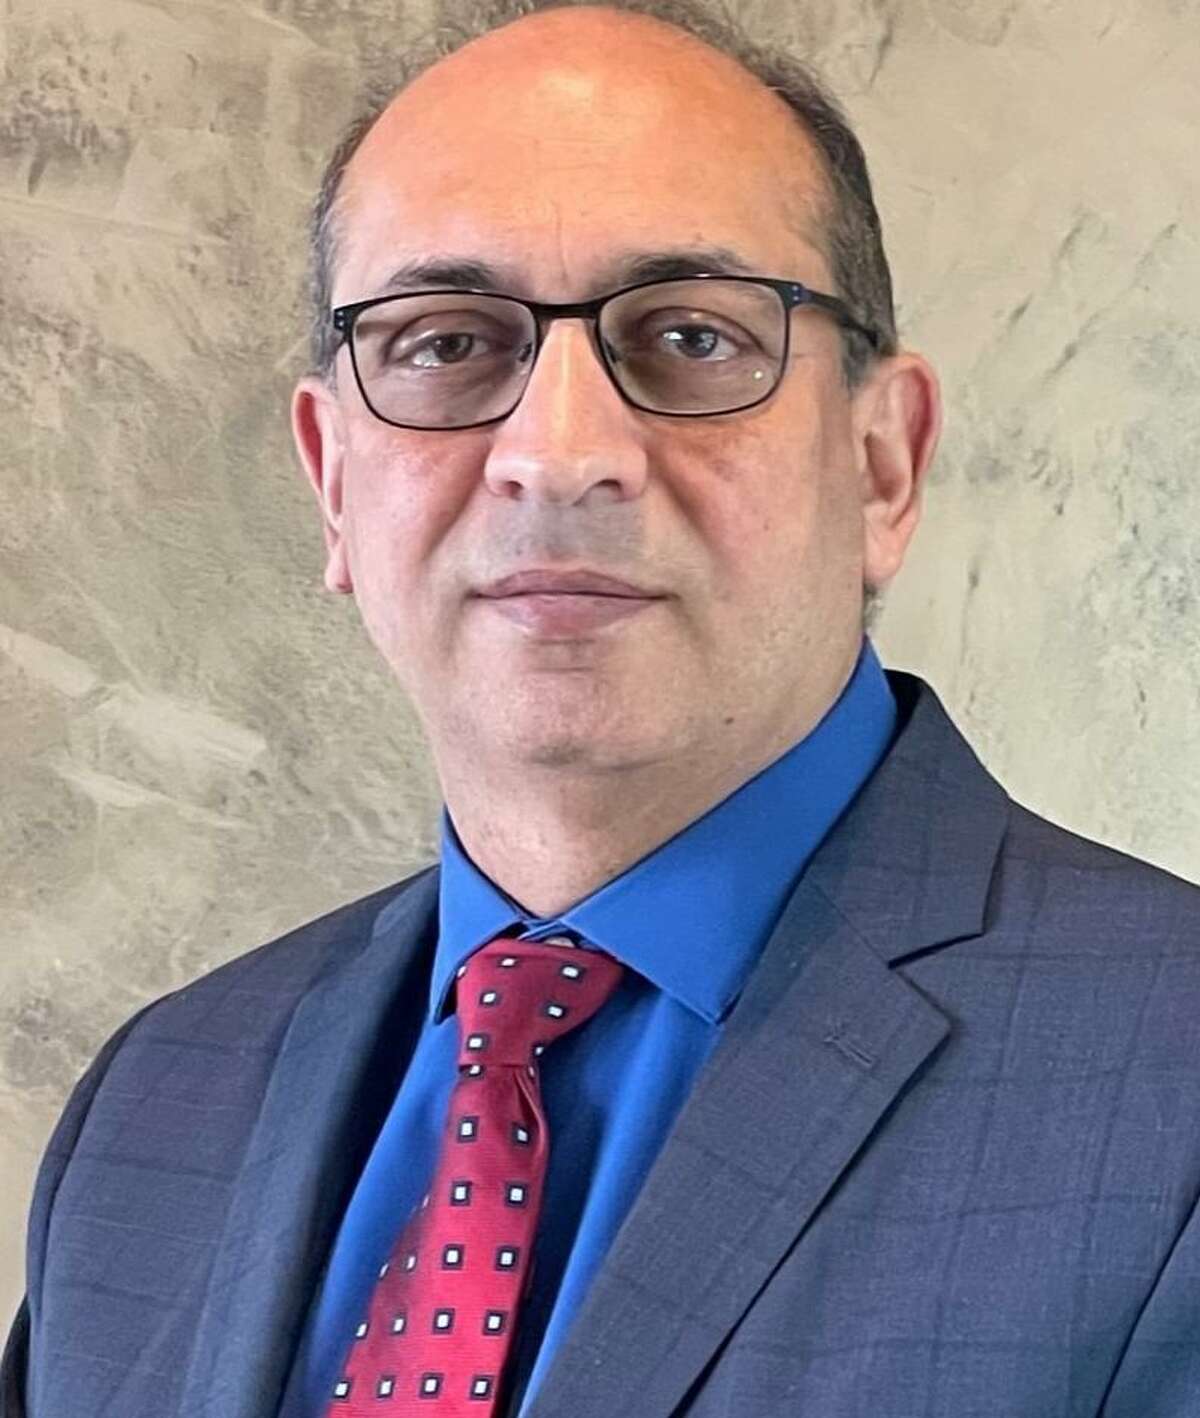 Mohamed Abdelrahman will be the next provost and vice president for academic affairs at Texas A&M University-San Antonio, officials announced Friday.